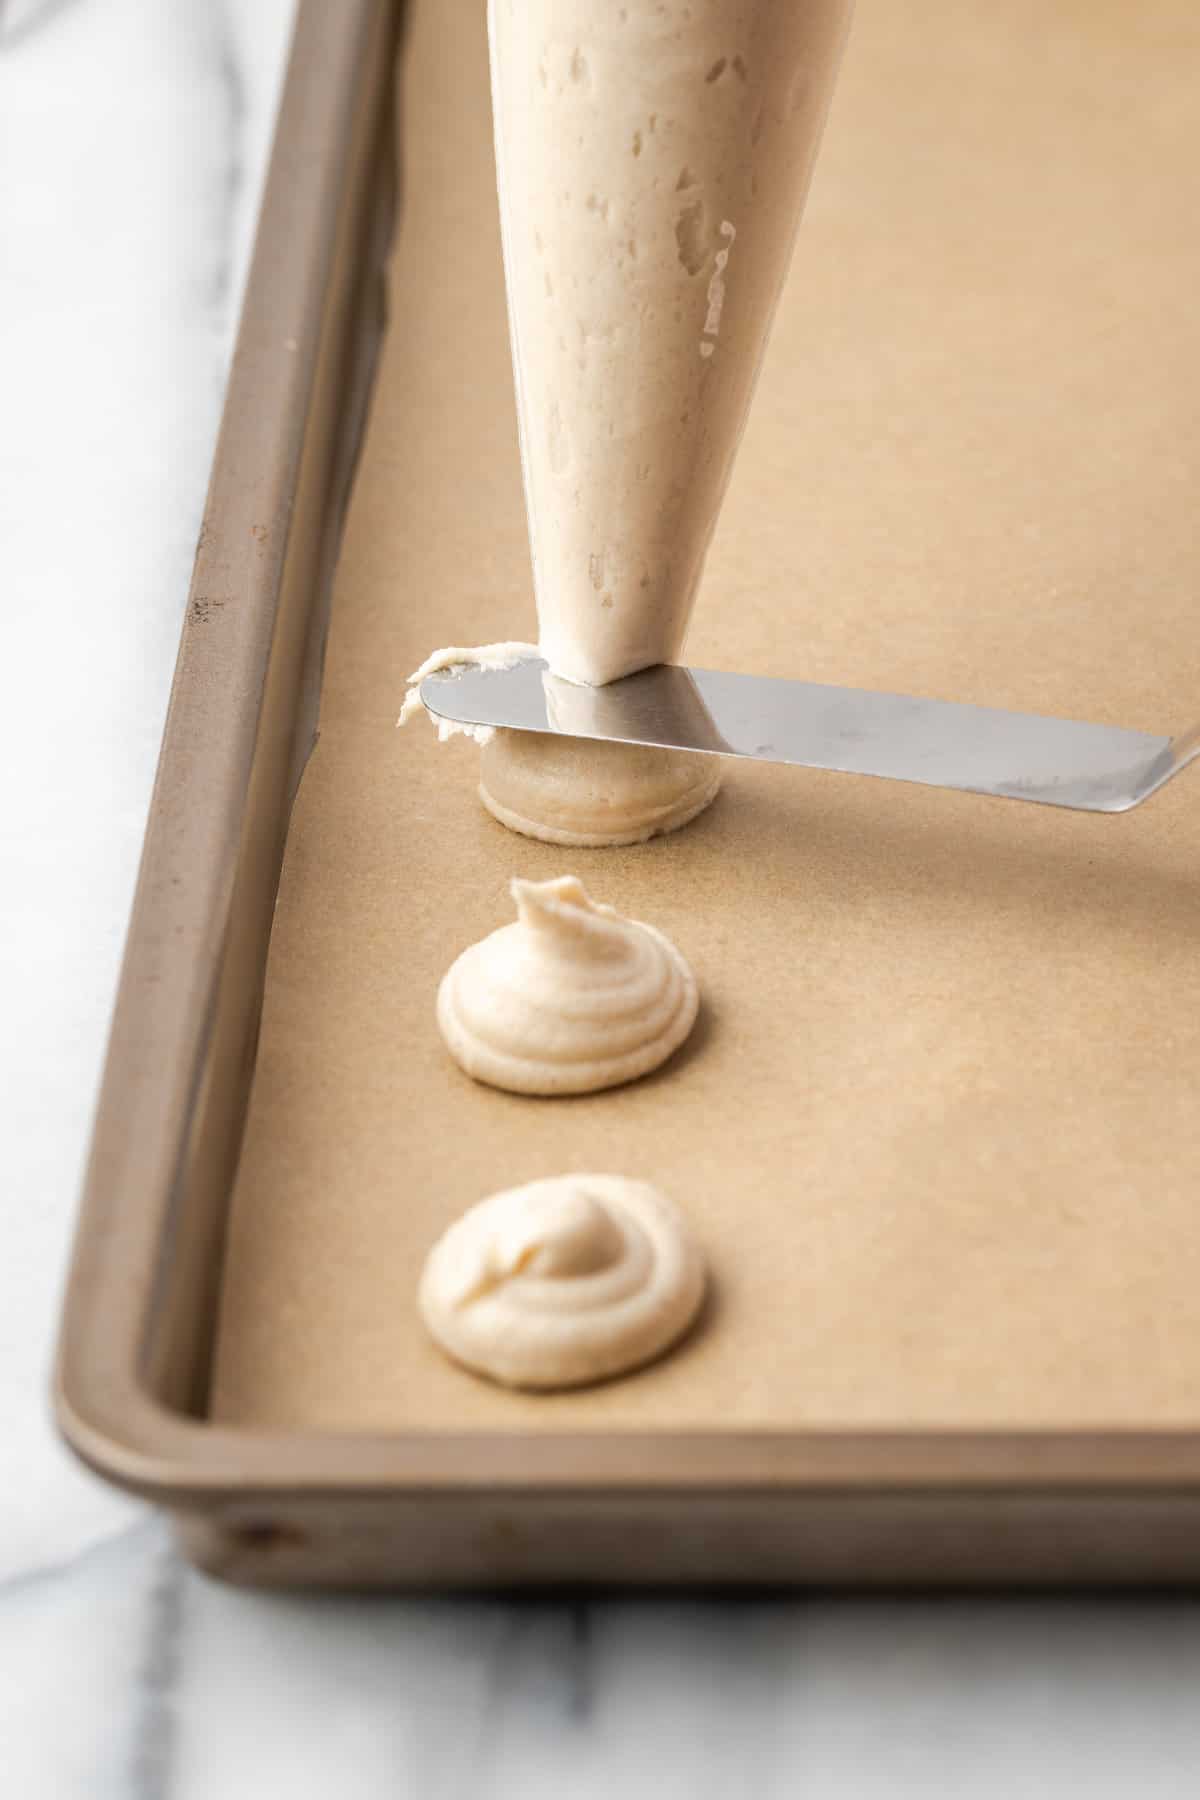 An knife is used to cut the vanilla wafer batter from the end of a piping bag as it's piped onto a lined baking sheet.